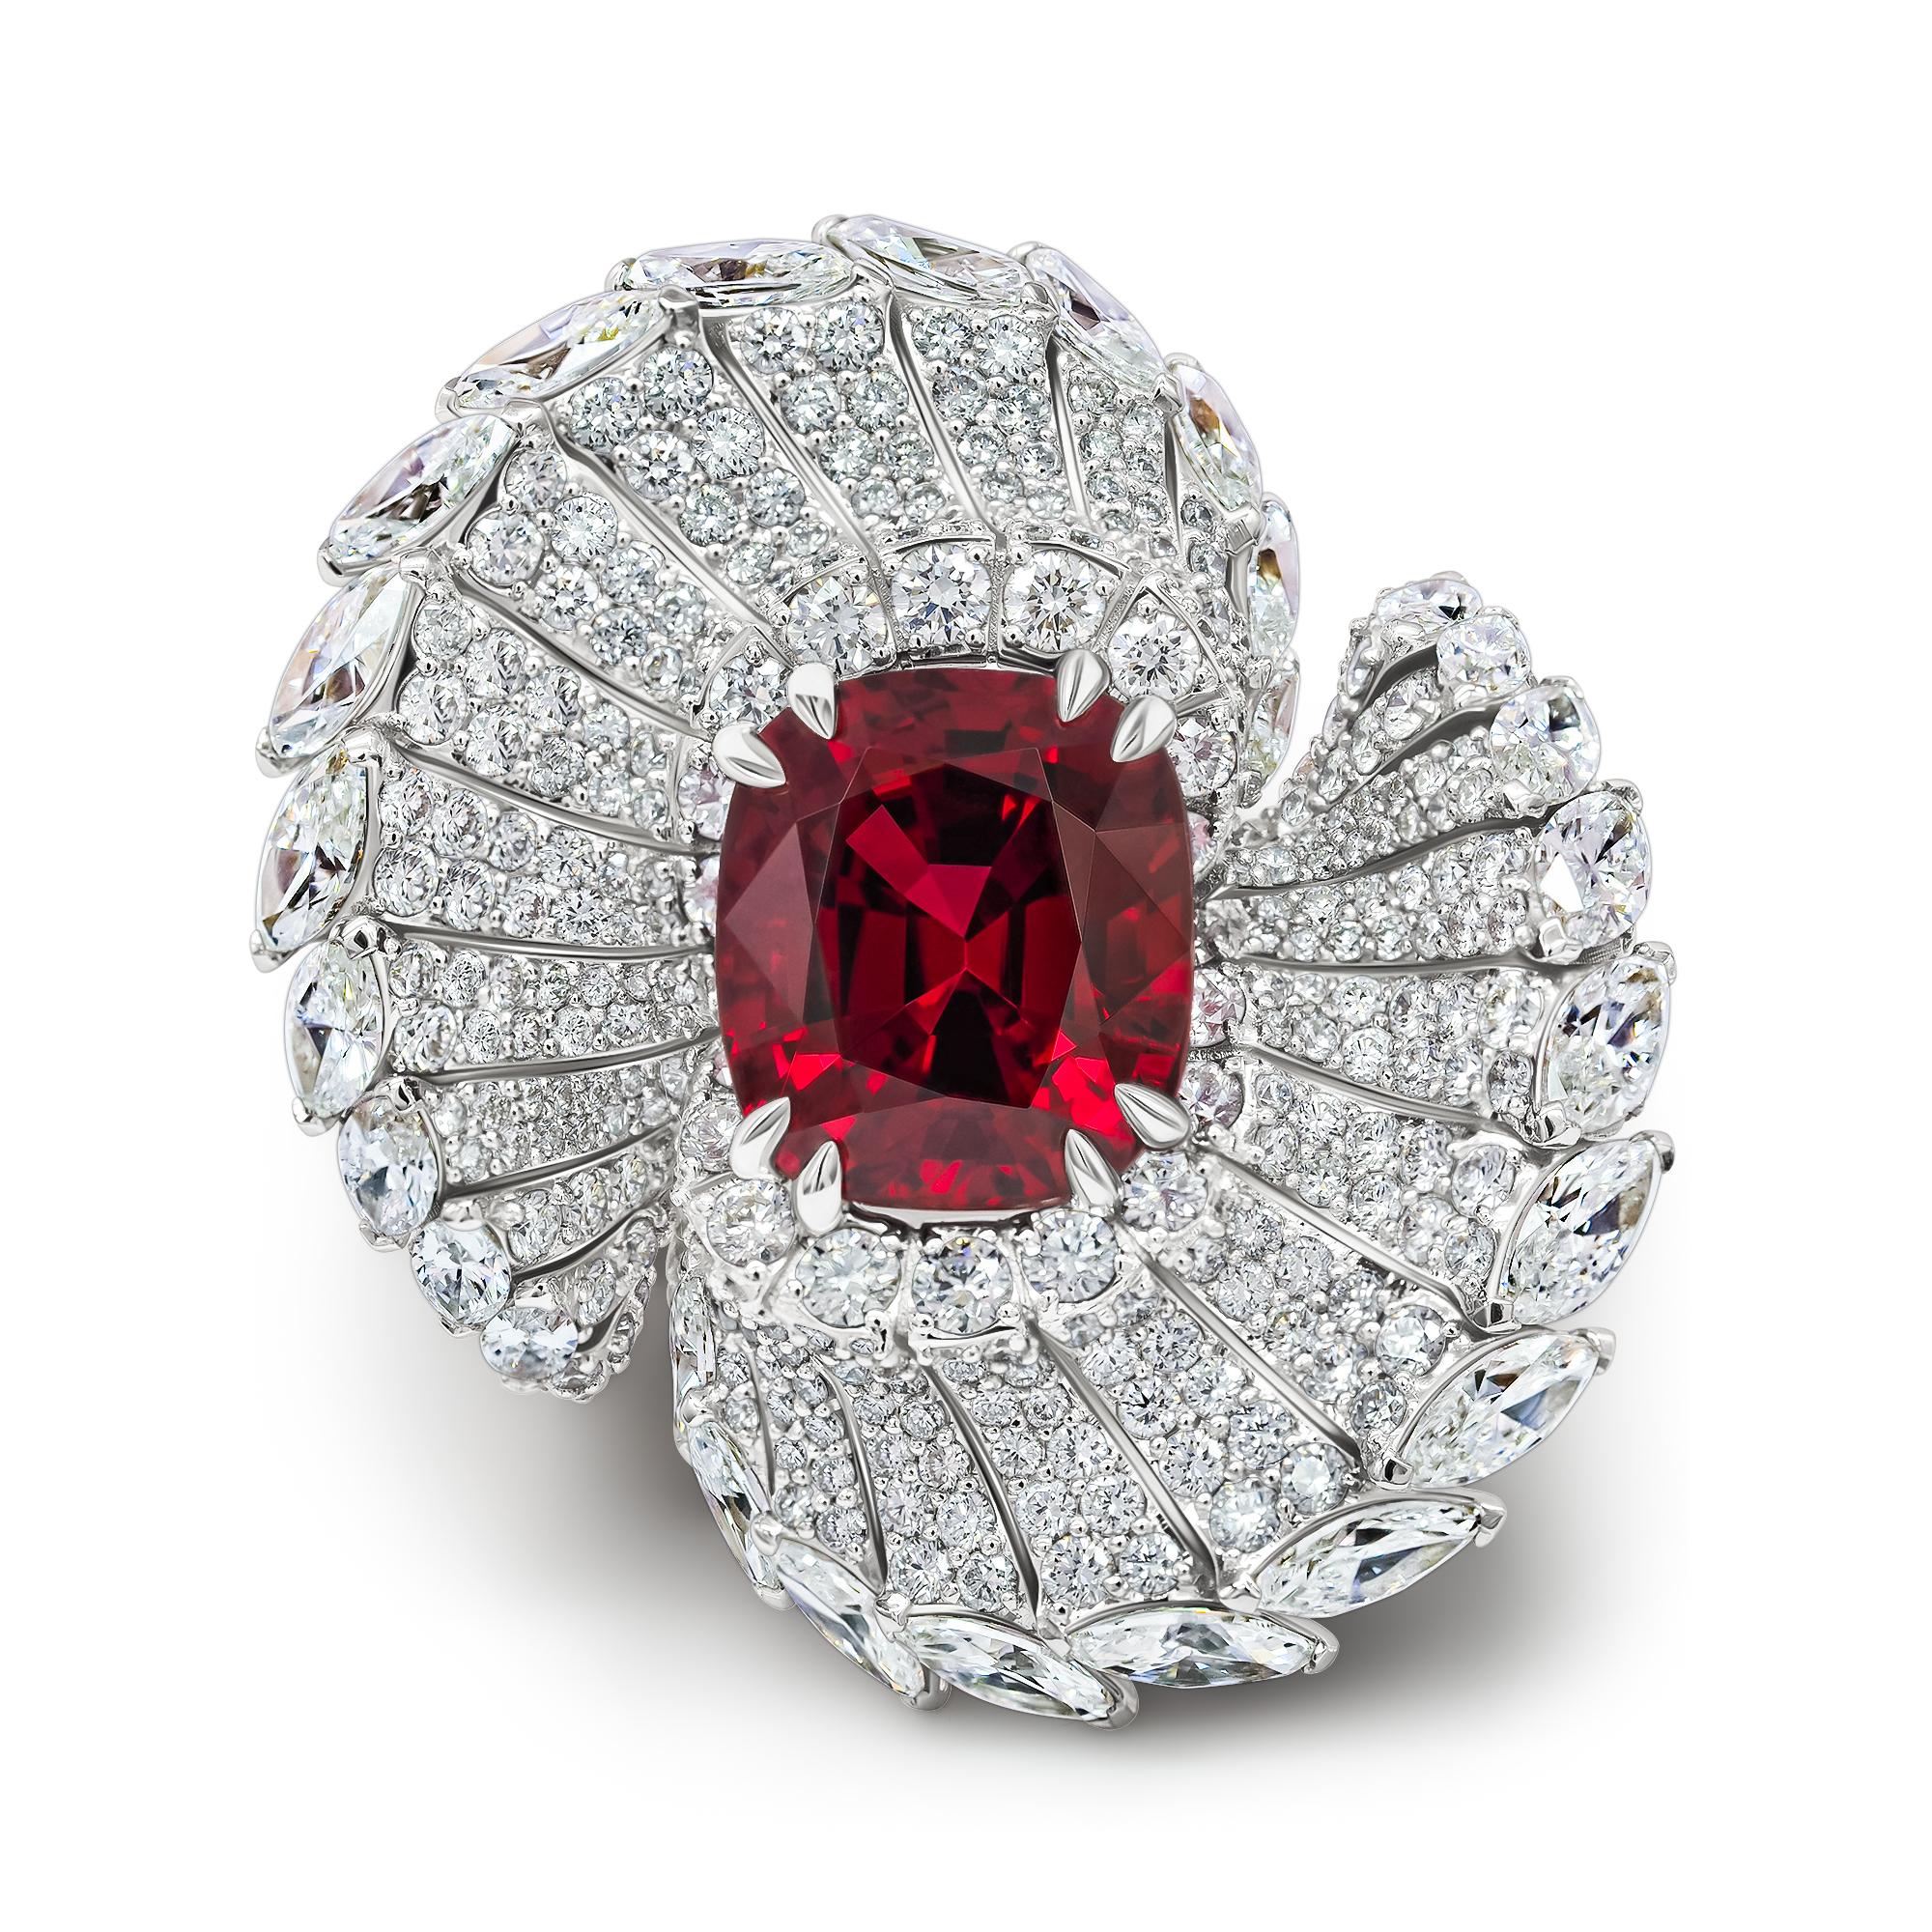 FIRE BIRD RED SPINEL RING 
from our Magic Garden collection. 

•	18K White gold.  
•	Red Spinel in cushion cut – total carat weight 5.09. 
•	Diamonds – 28 pc in marquise cut, total carat weight 2.82.
•	Diamonds – 466 pc in round cut – total carat